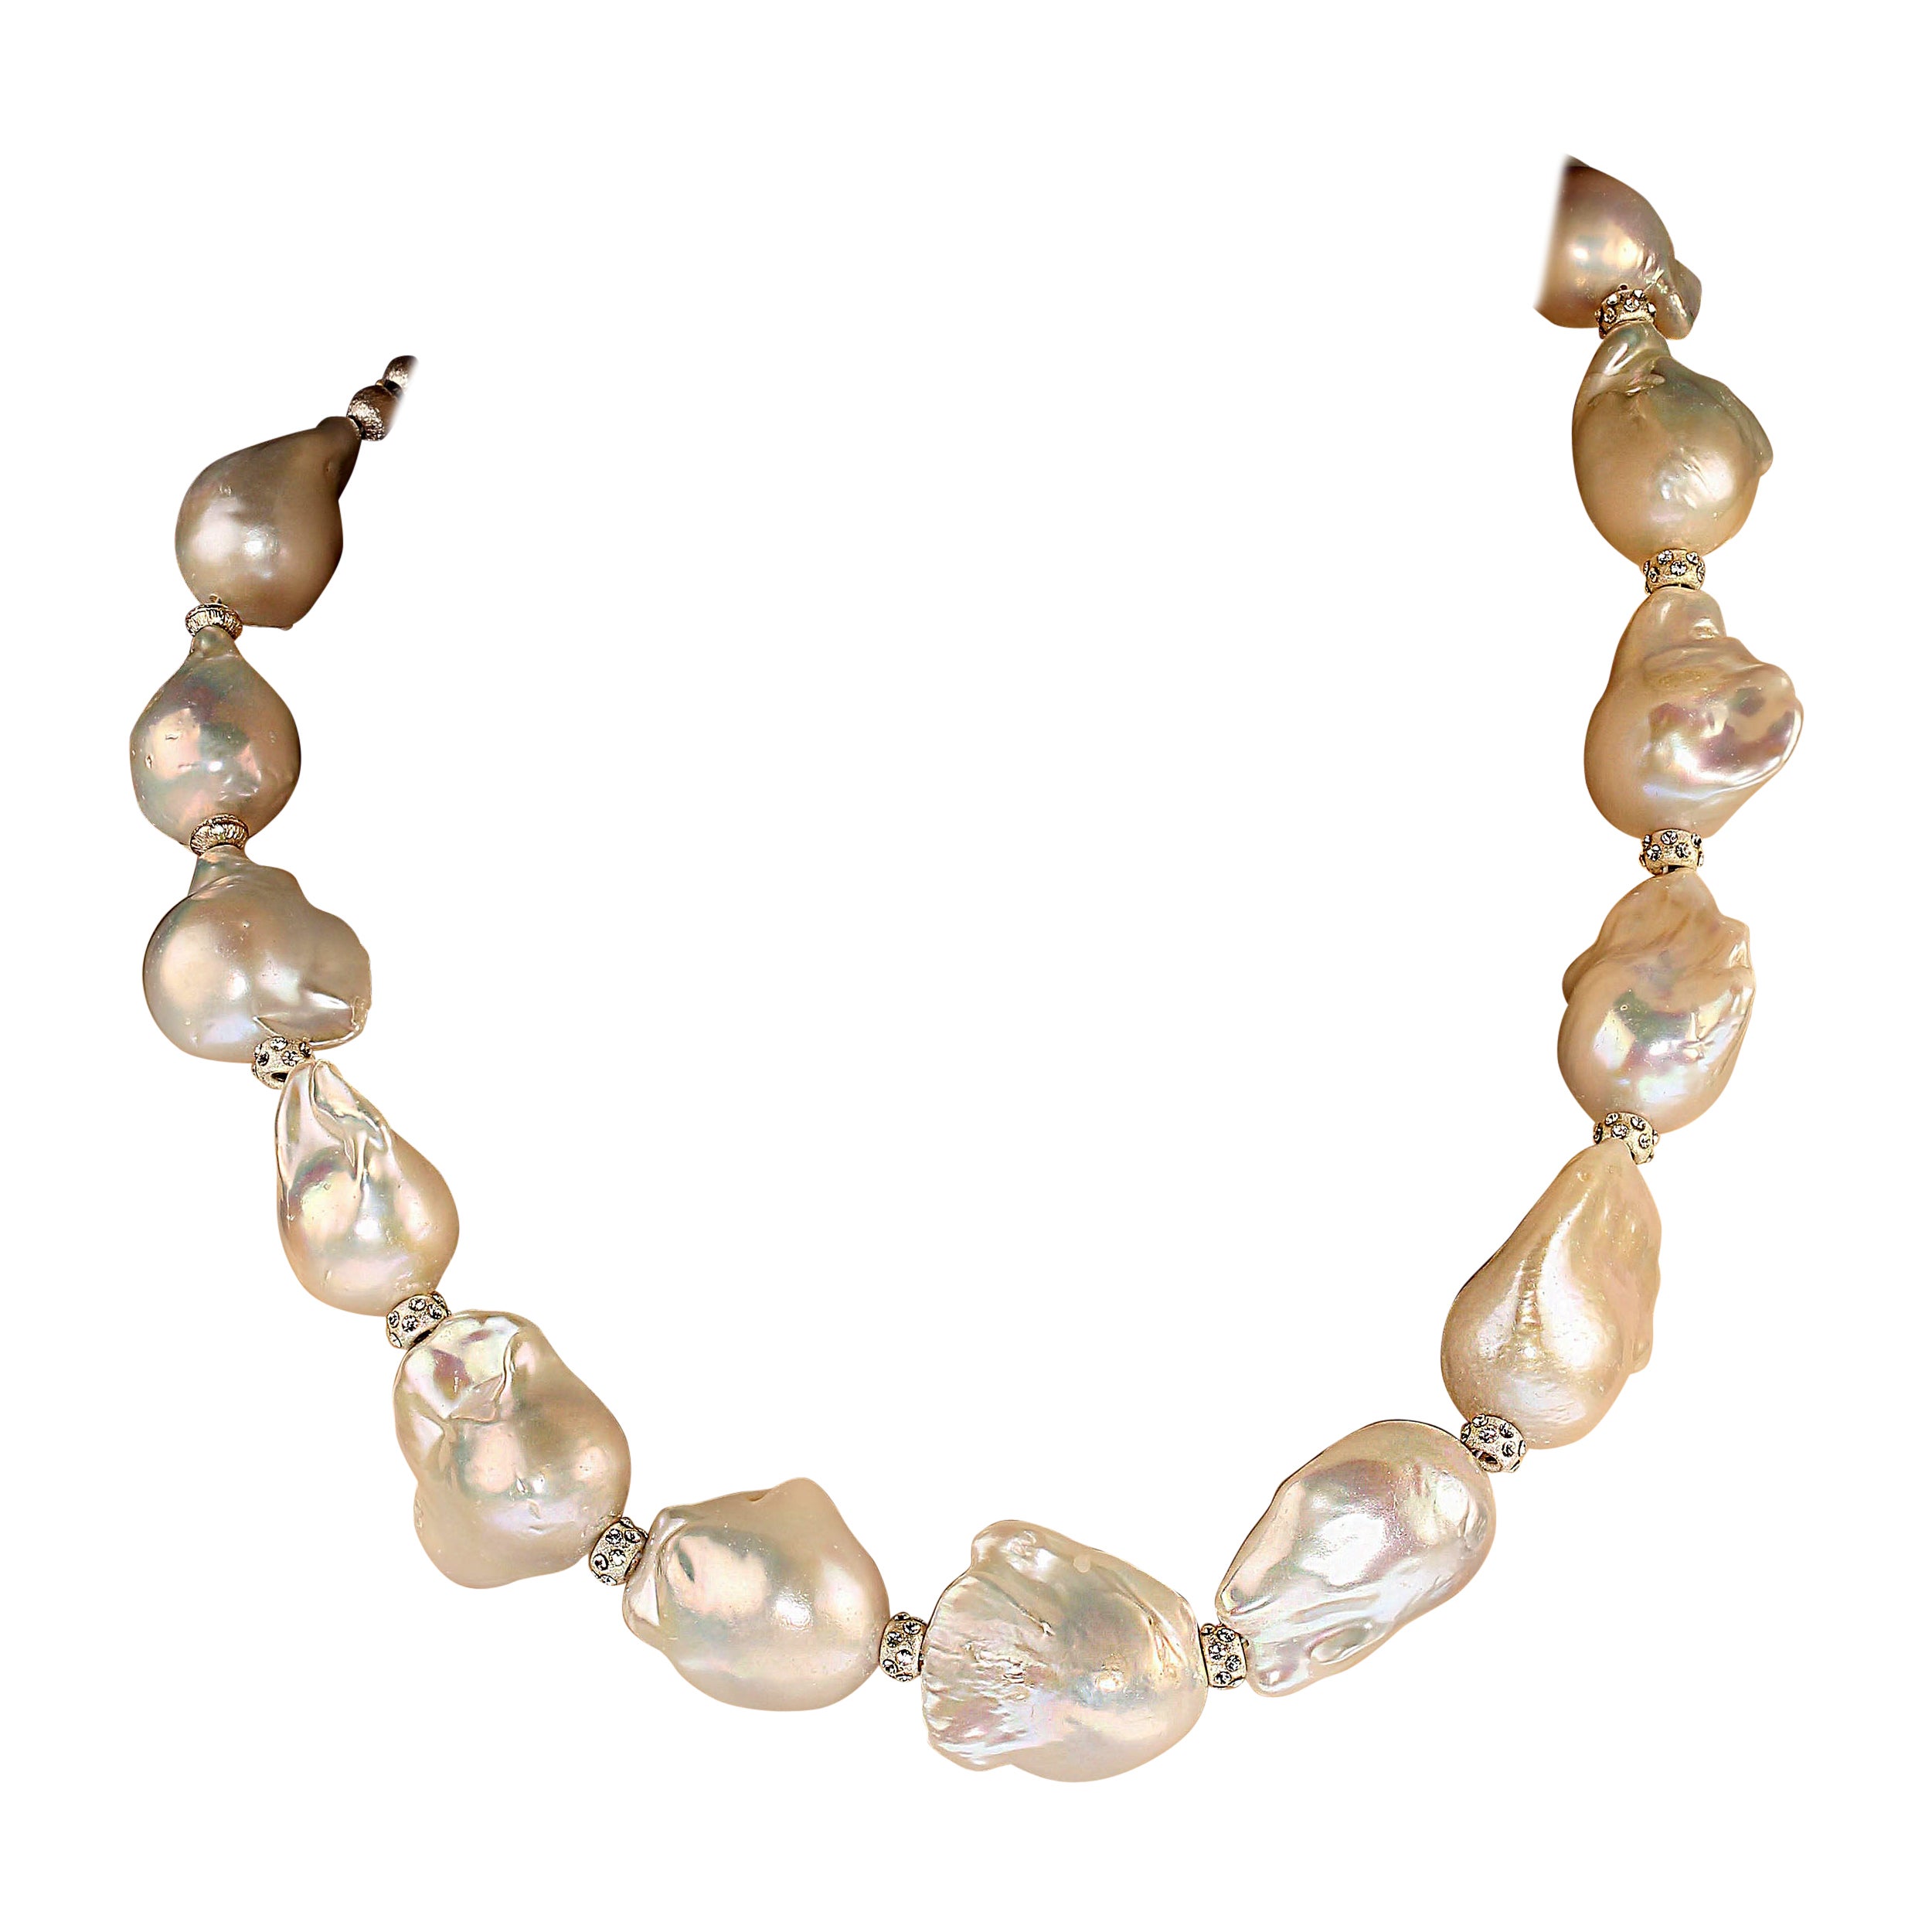 19-Inch glorious giant white baroque pearl necklace with sparkling crystal accents.  This fabulous necklace will be your 'go to' necklace favorite from your first wearing. The large, 16-19 MM iridescent pearls will entrance you.  Each is its own